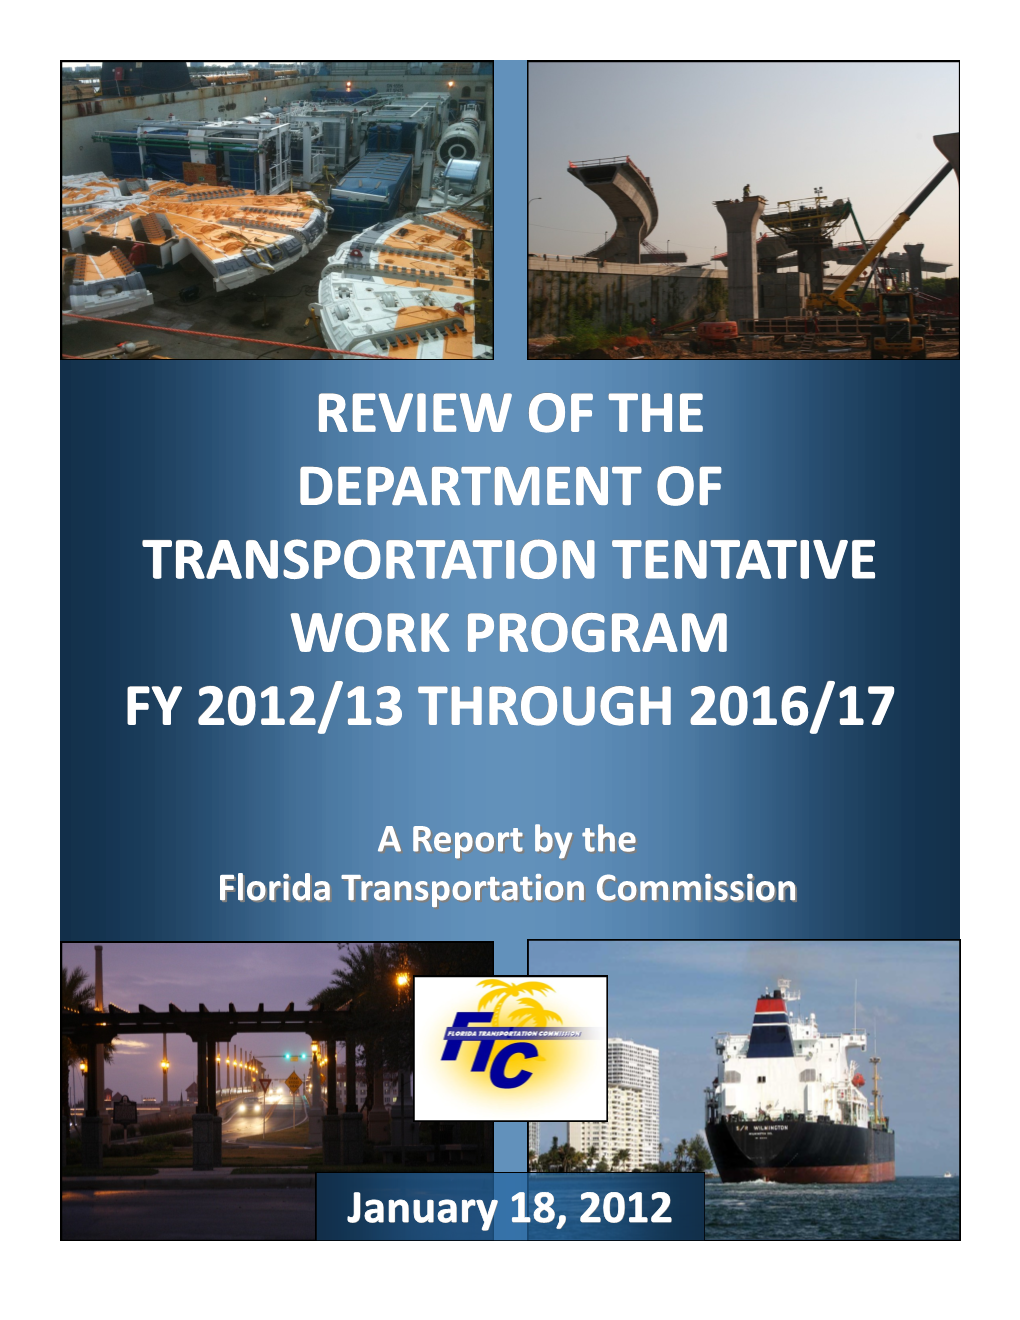 Review of the Department of Transportation Tentative Work Program Fy 2012/13 Through 2016/17